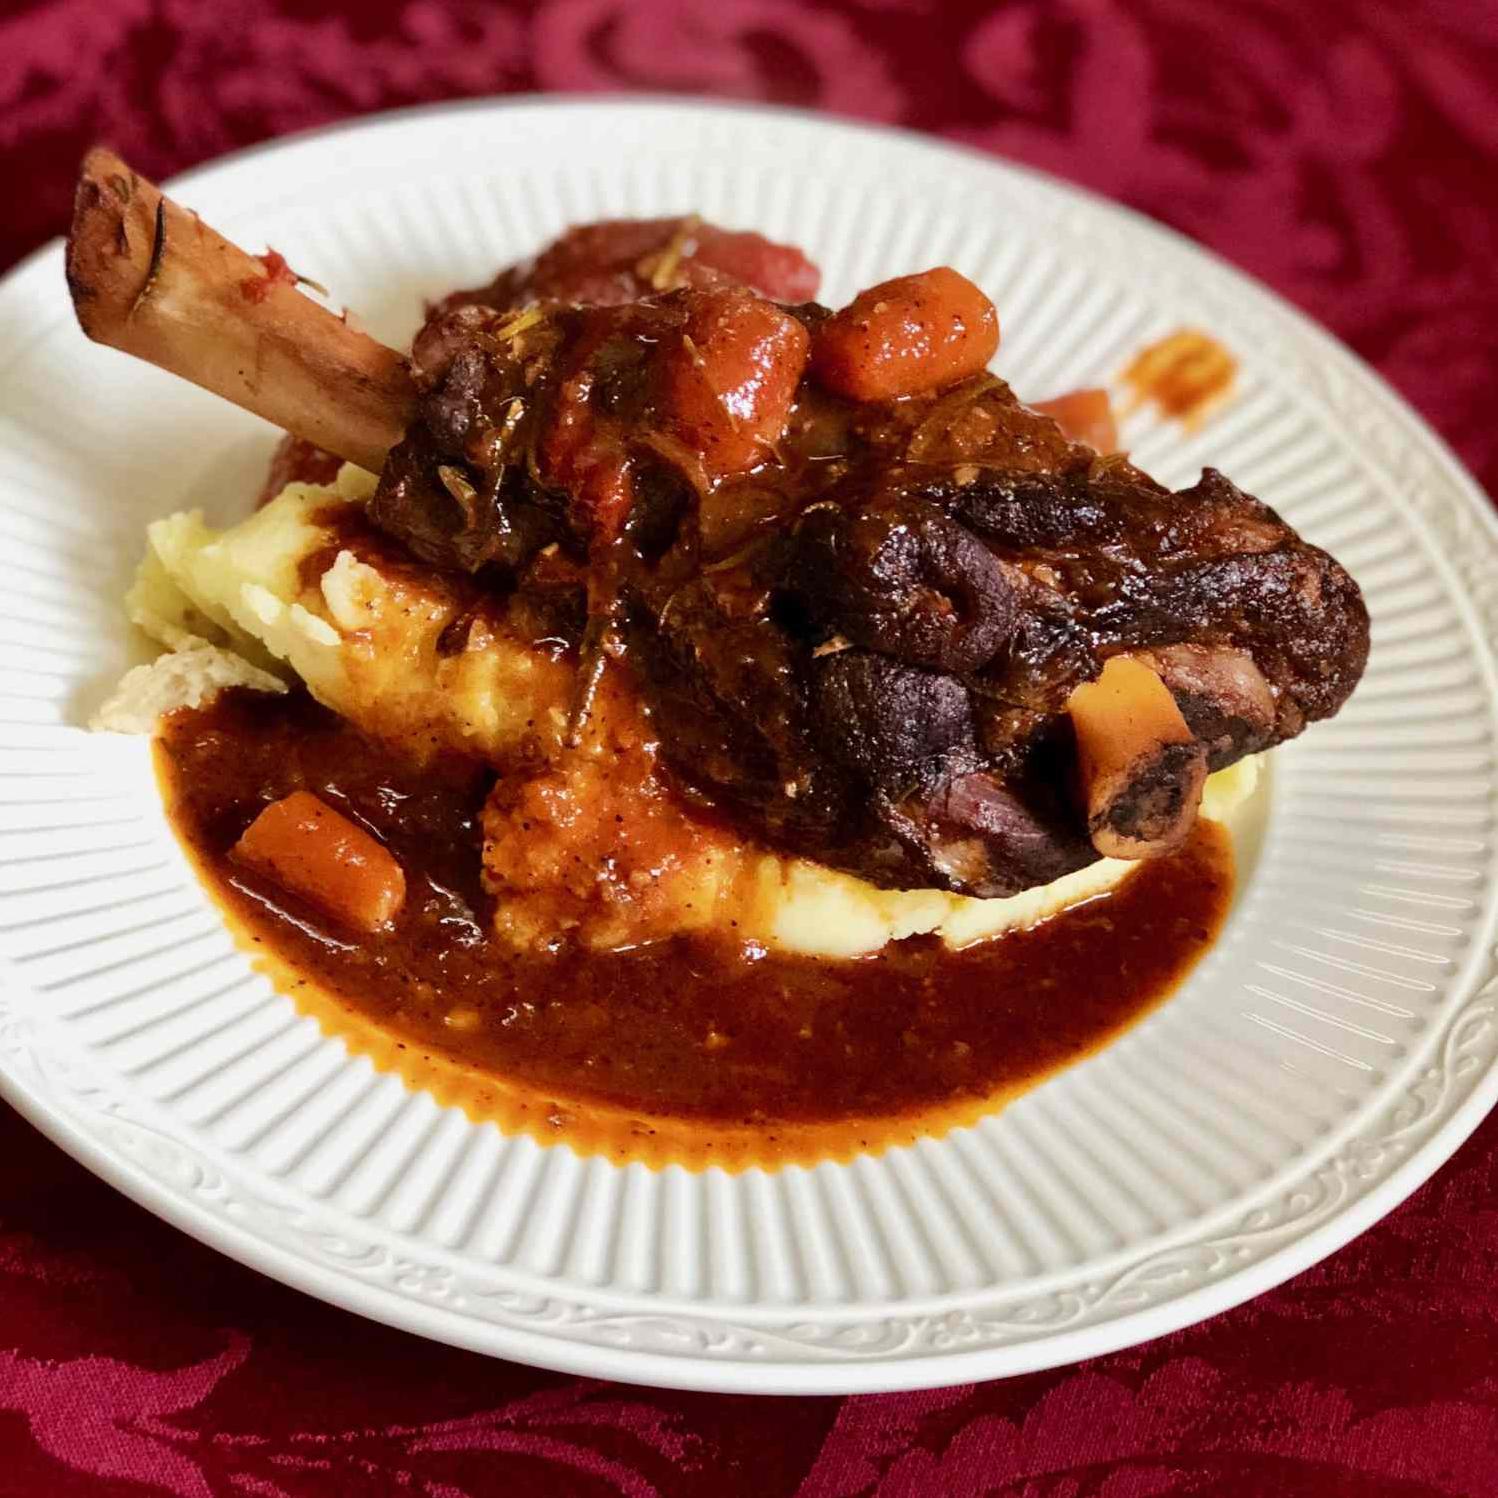  Succulent and flavorful, this braised lamb shank will have you coming back for seconds!